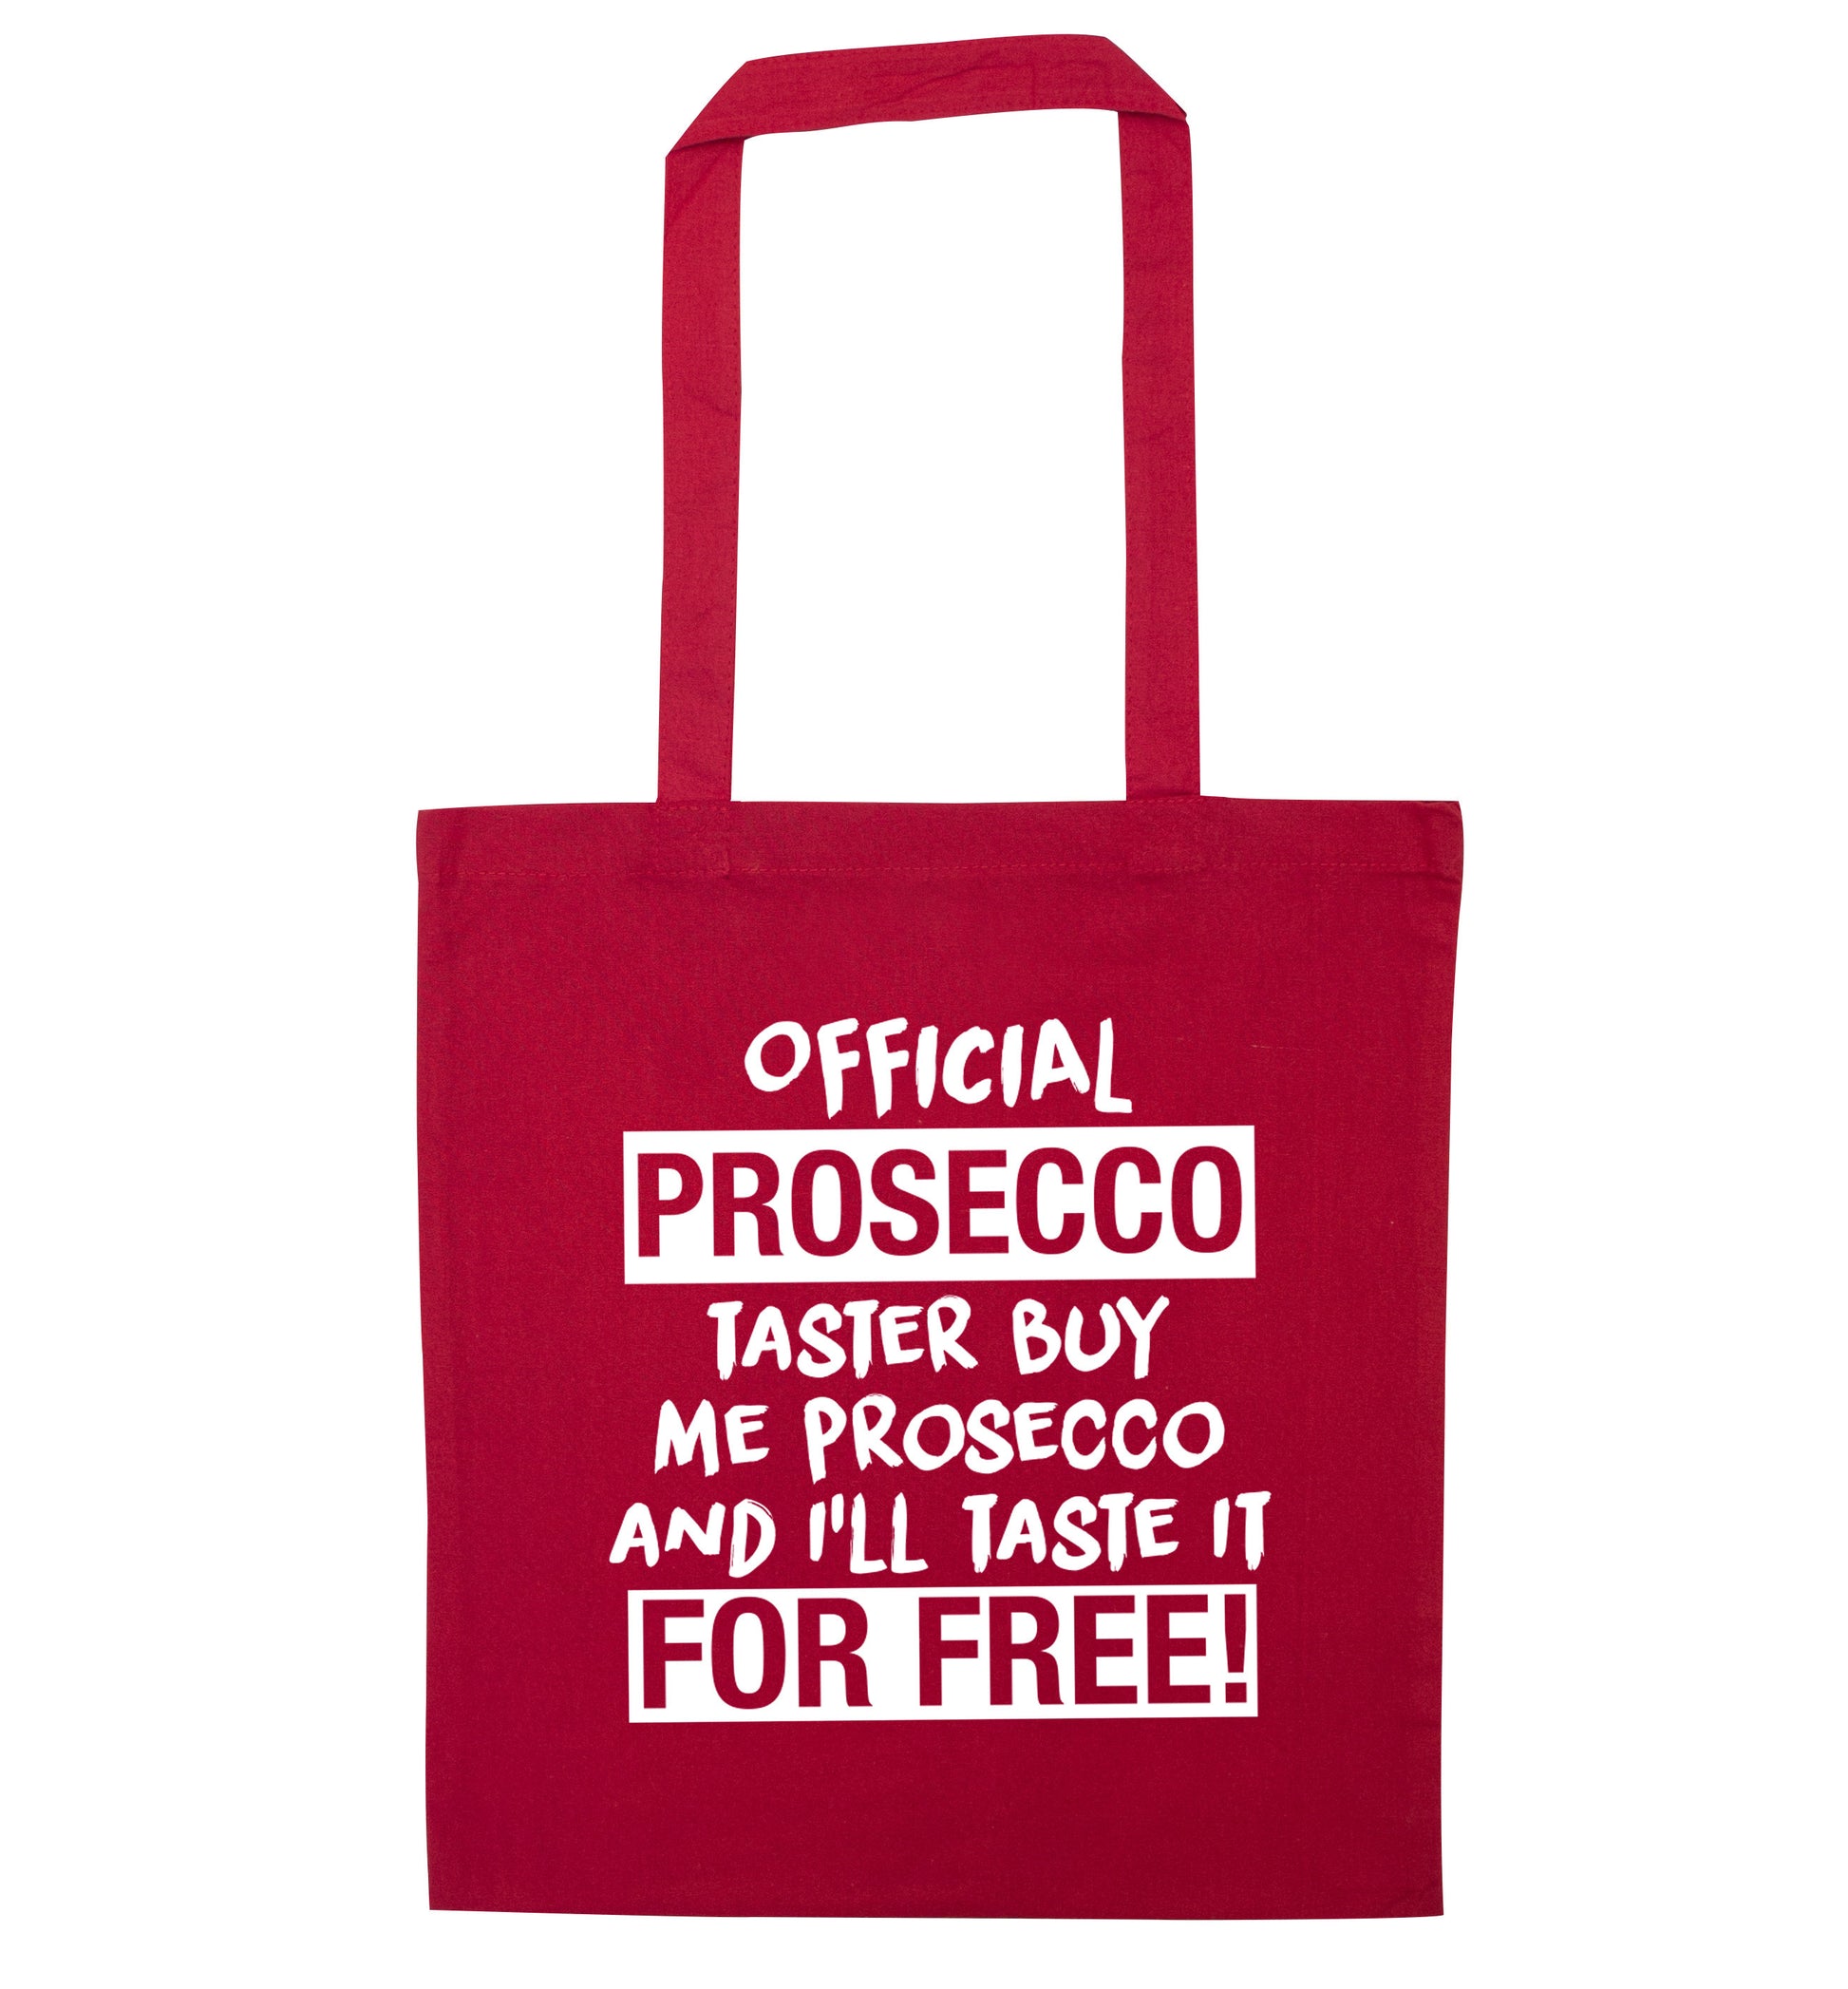 Official prosecco taster buy me wine and I'll taste it for free red tote bag